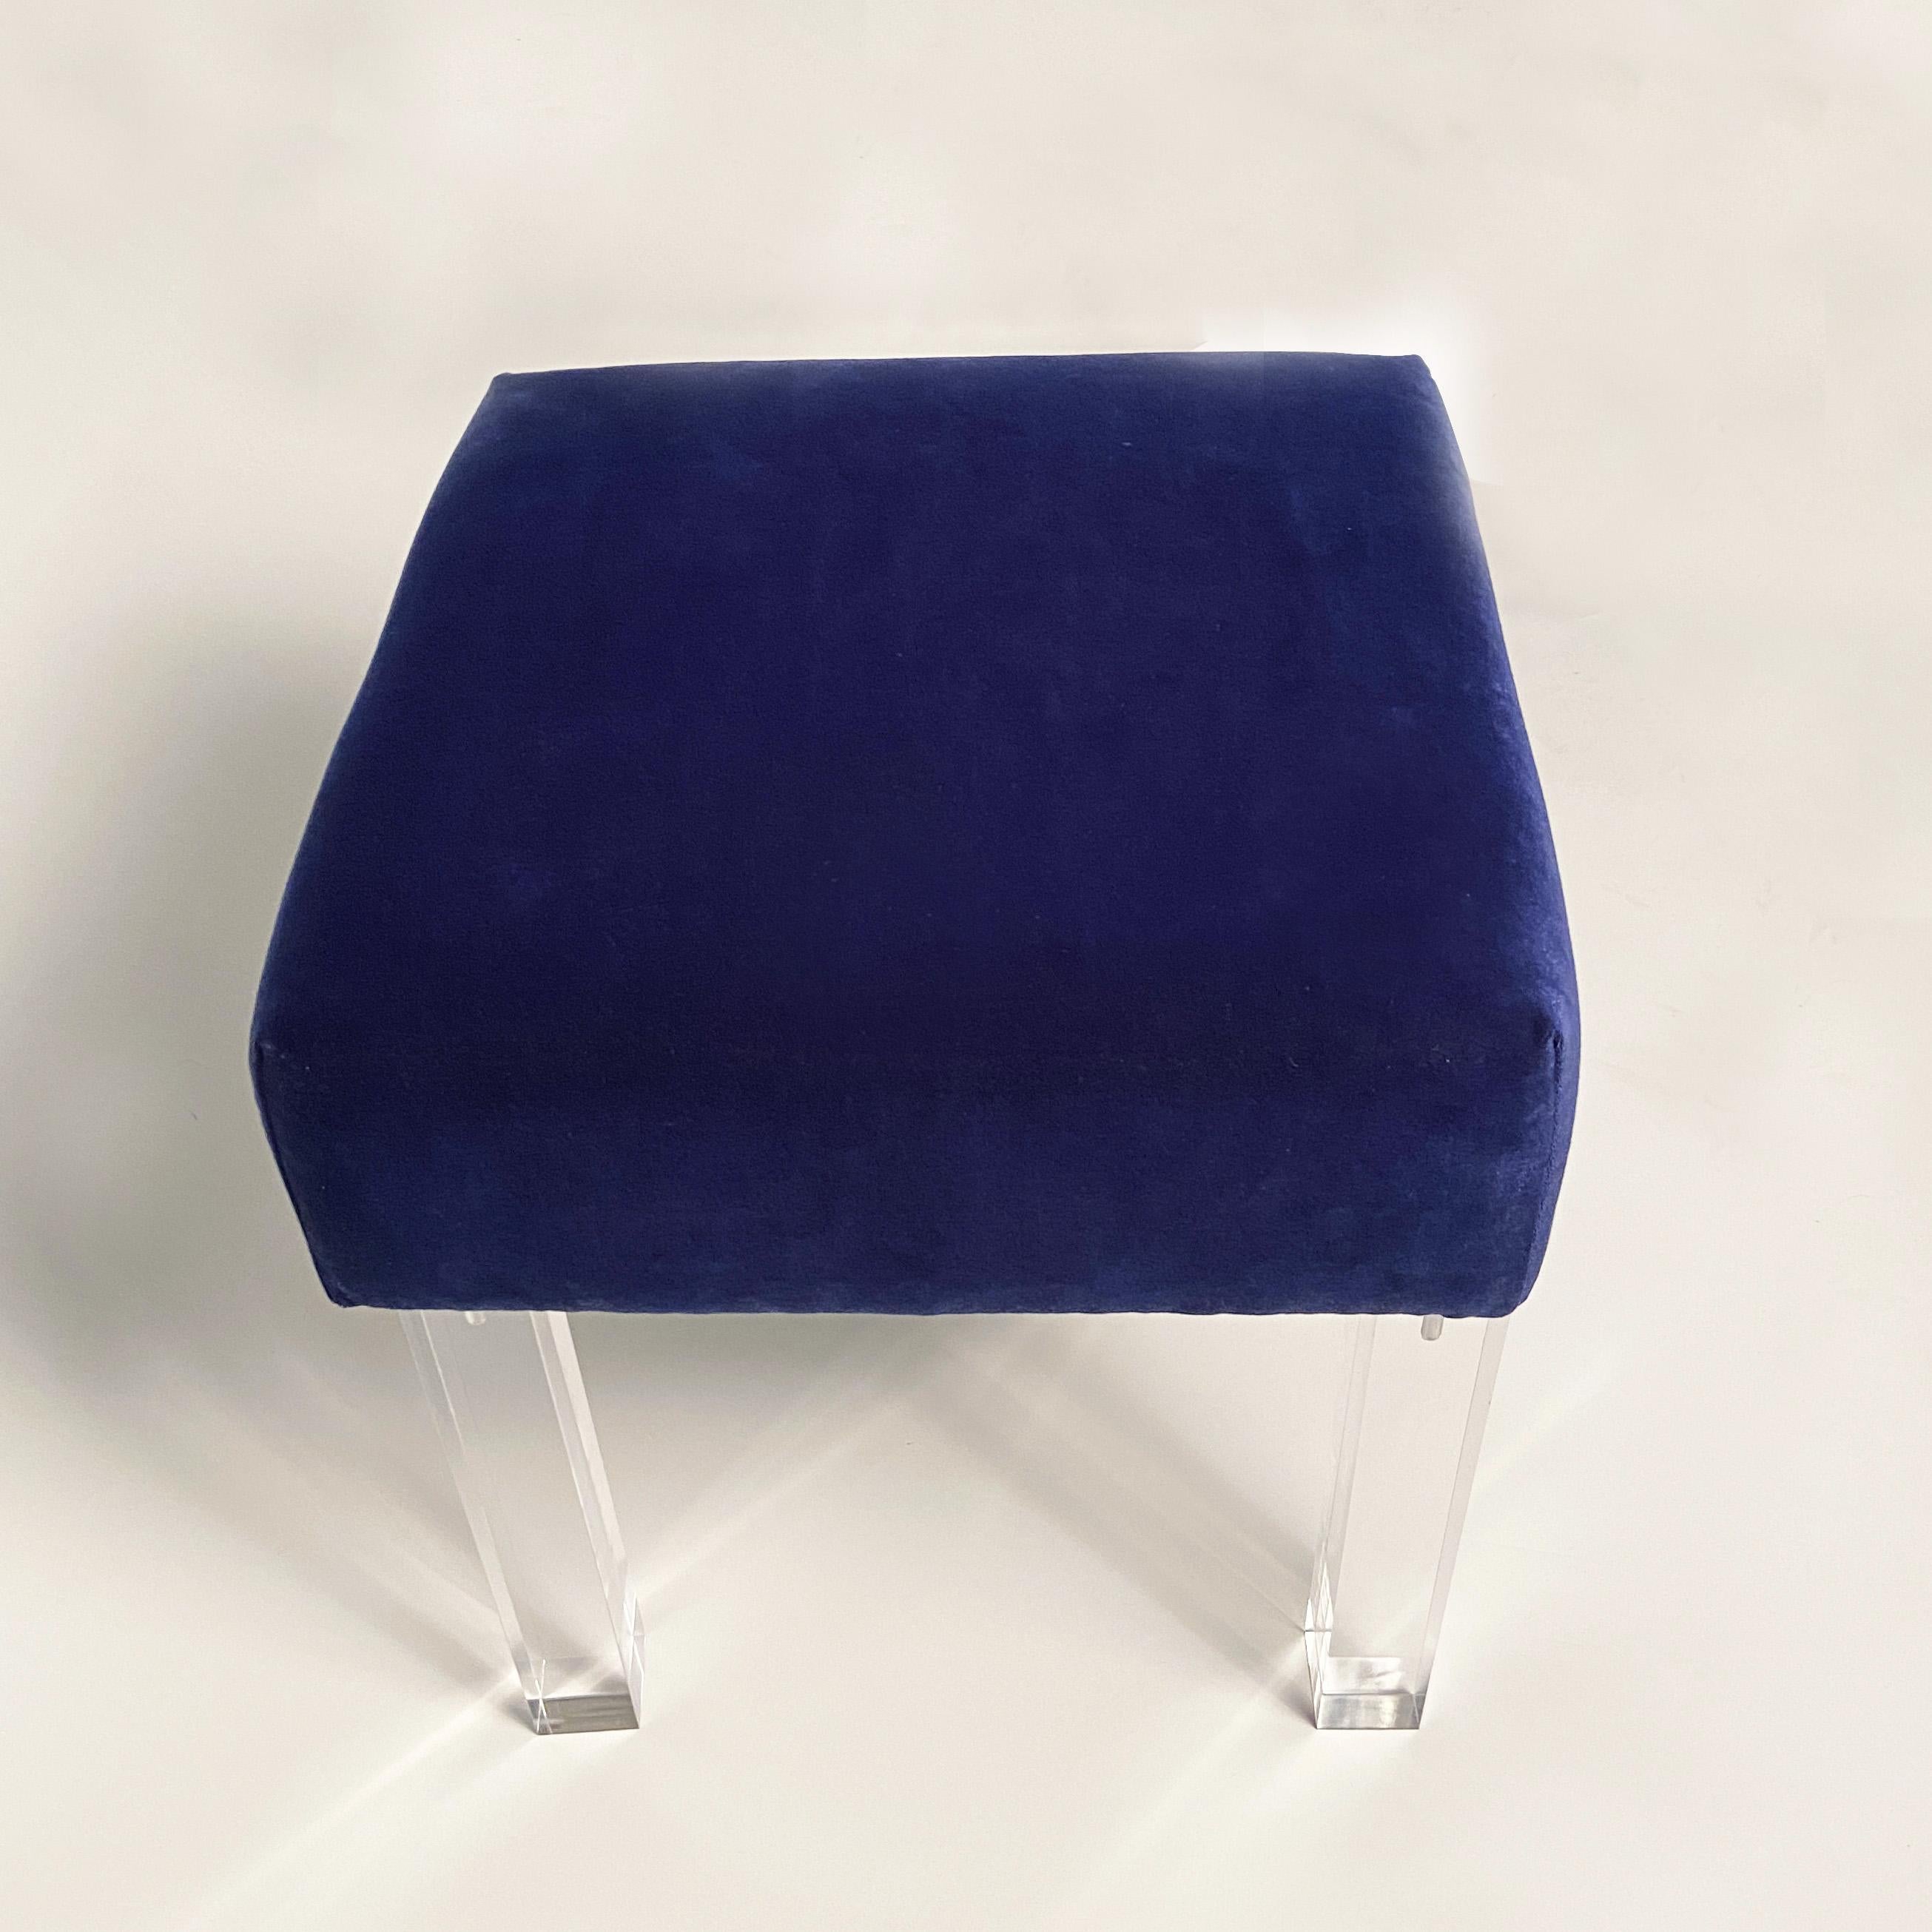 Modern Low Stool in Navy Velvet with Lucite Legs In New Condition For Sale In Wilton, CT